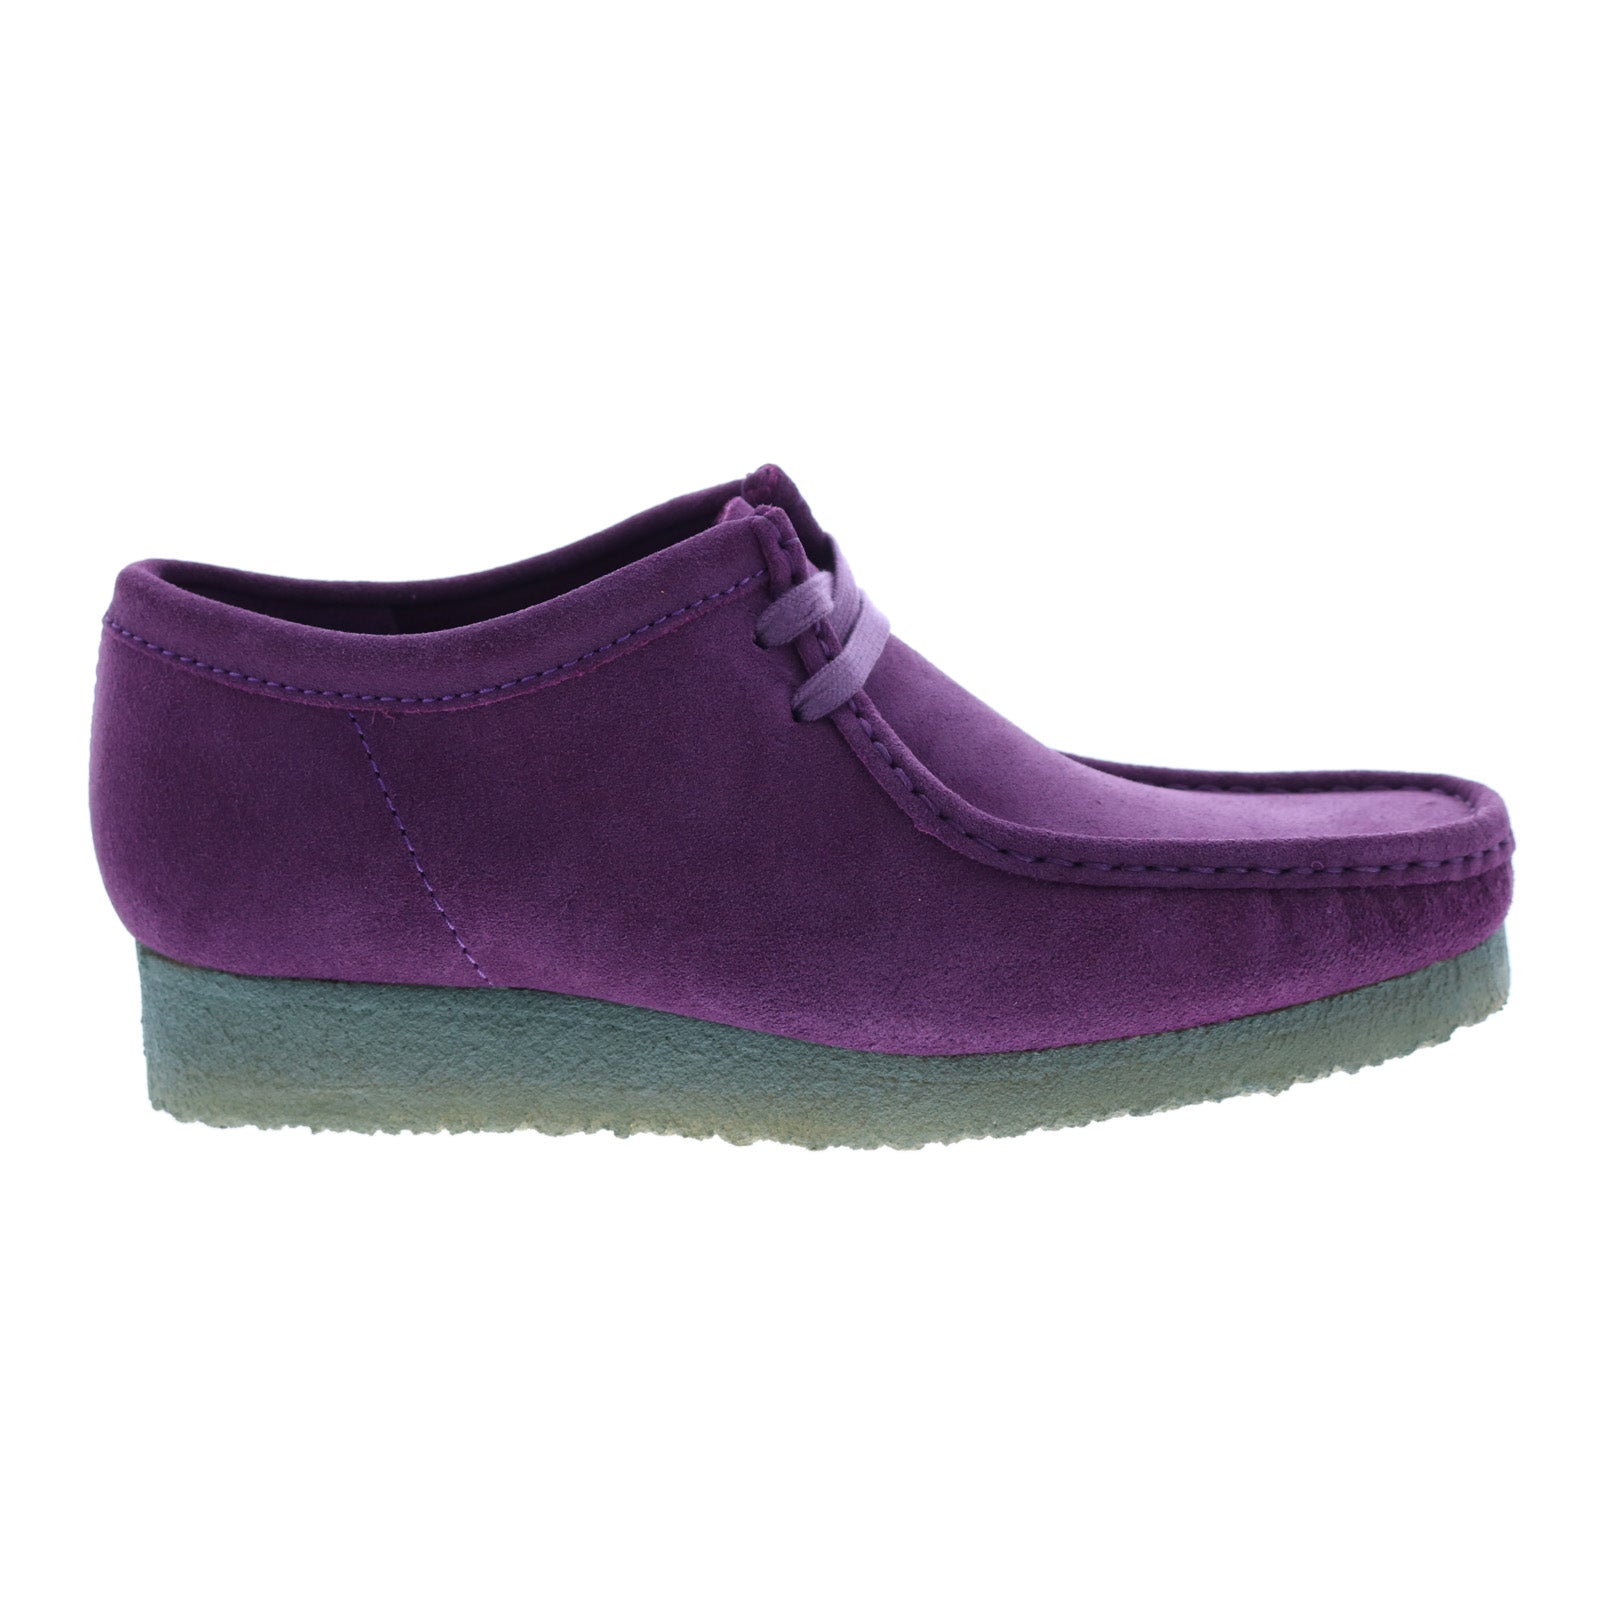 Clarks Wallabee 26168860 Purple Suede Oxfords & Lace Casual Ruze Shoes